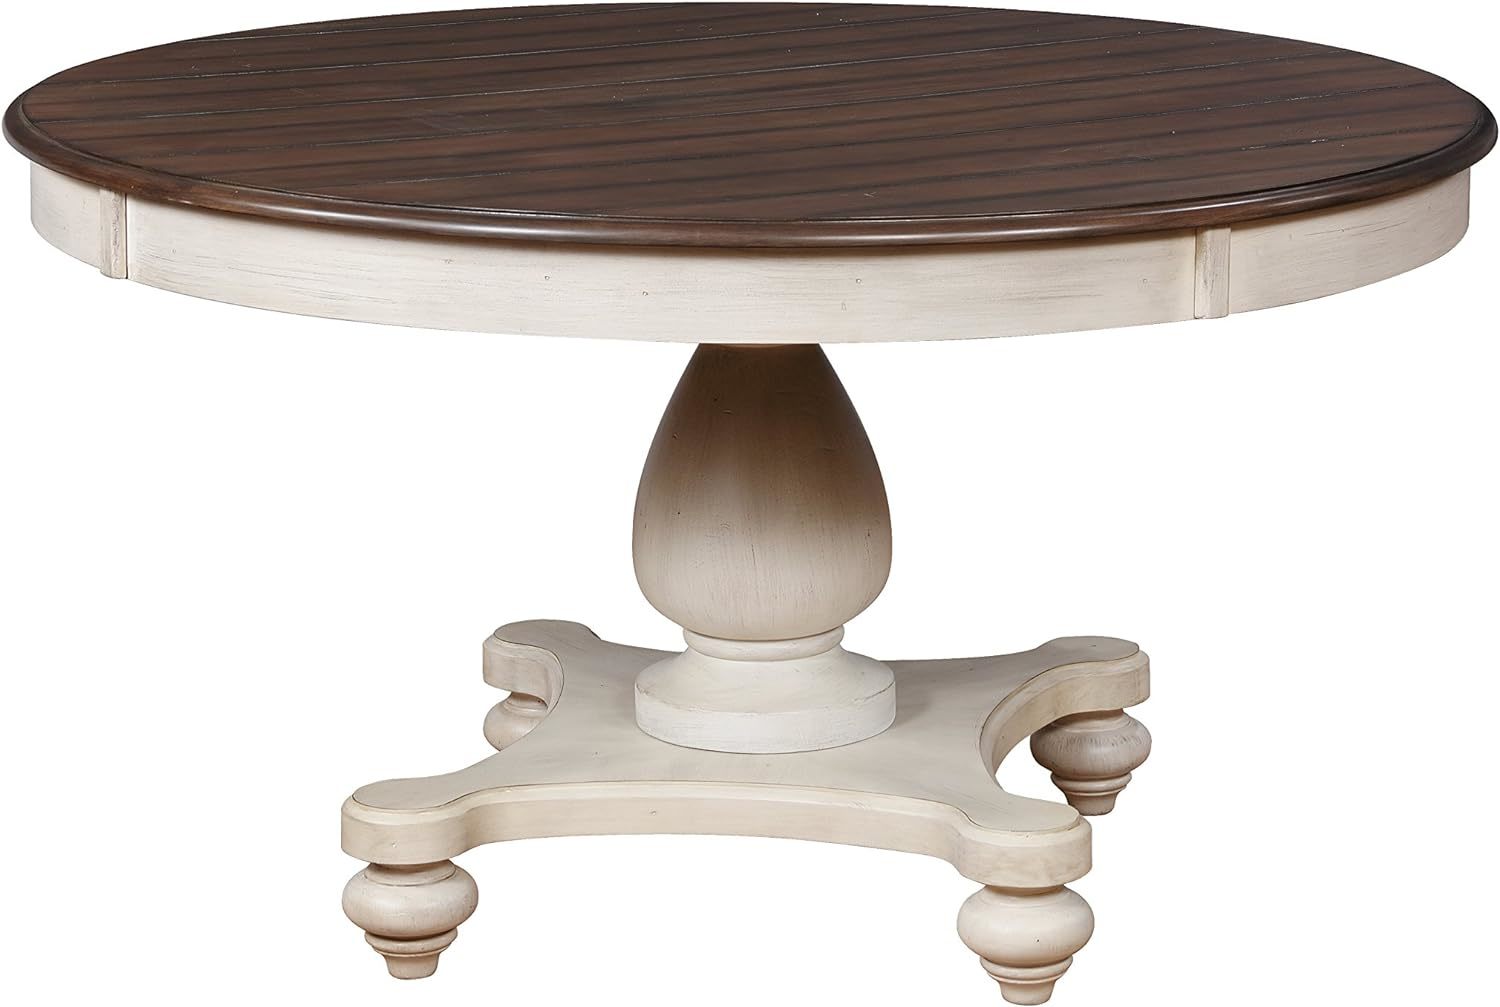 Roundhill Furniture Arch Weathered Round Dining Table Pedastal Base, Multicolor. - $713.98